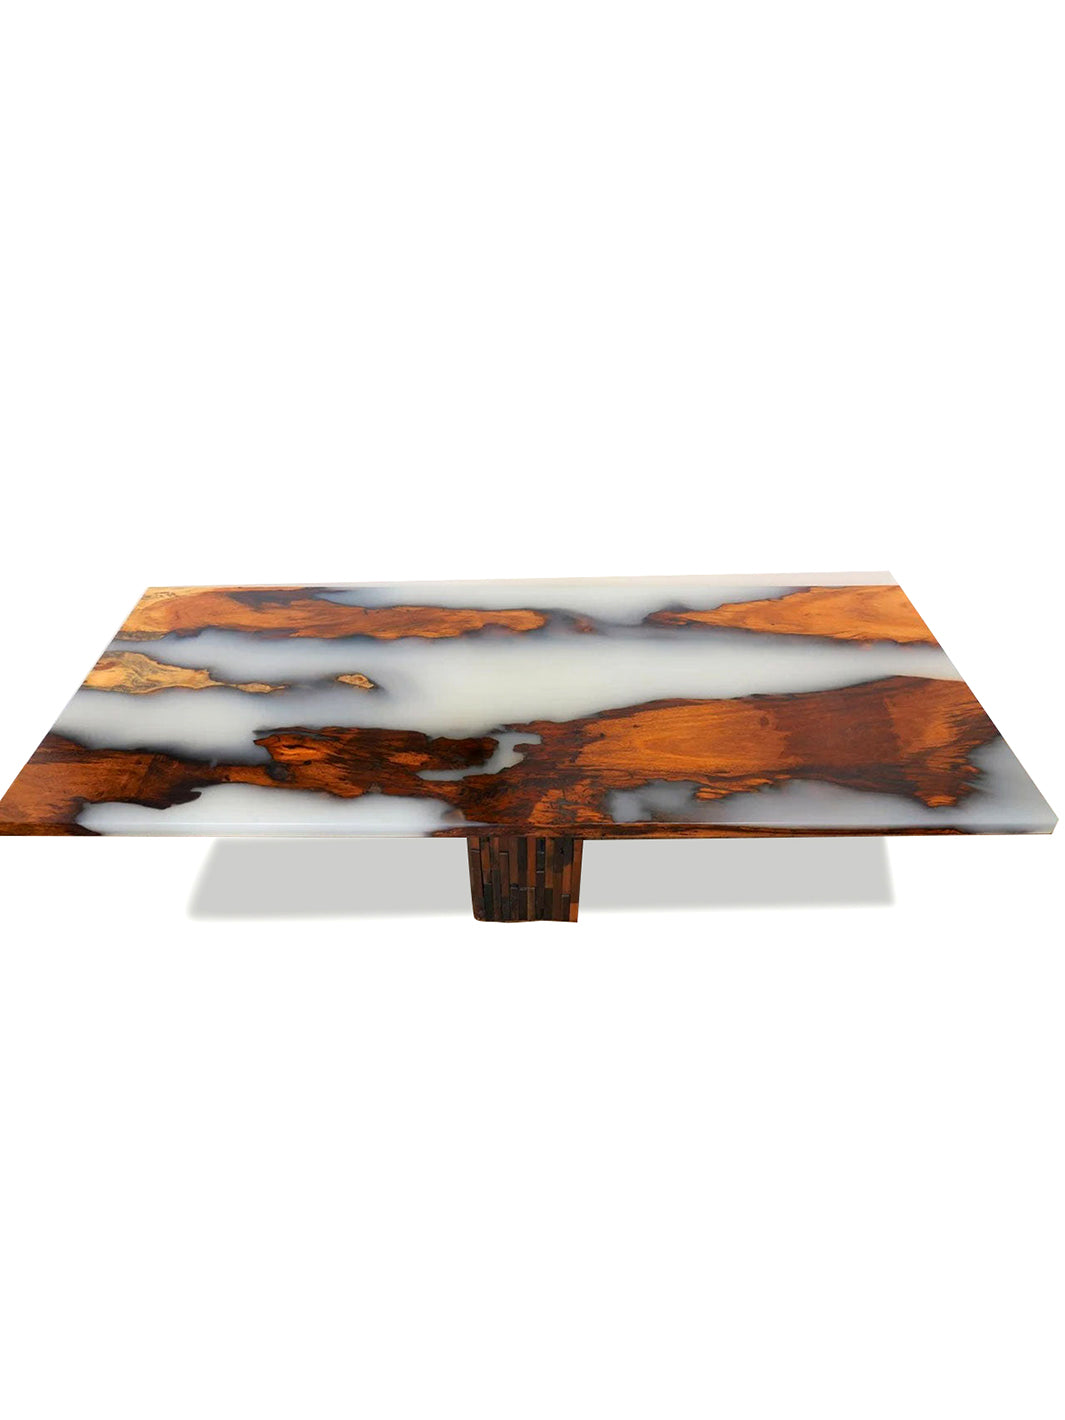 Handcrafted Rosewood Slab Epoxy Resin Wooden Dining Table | 170x70cm Made 4 Decor Tables MDR0002